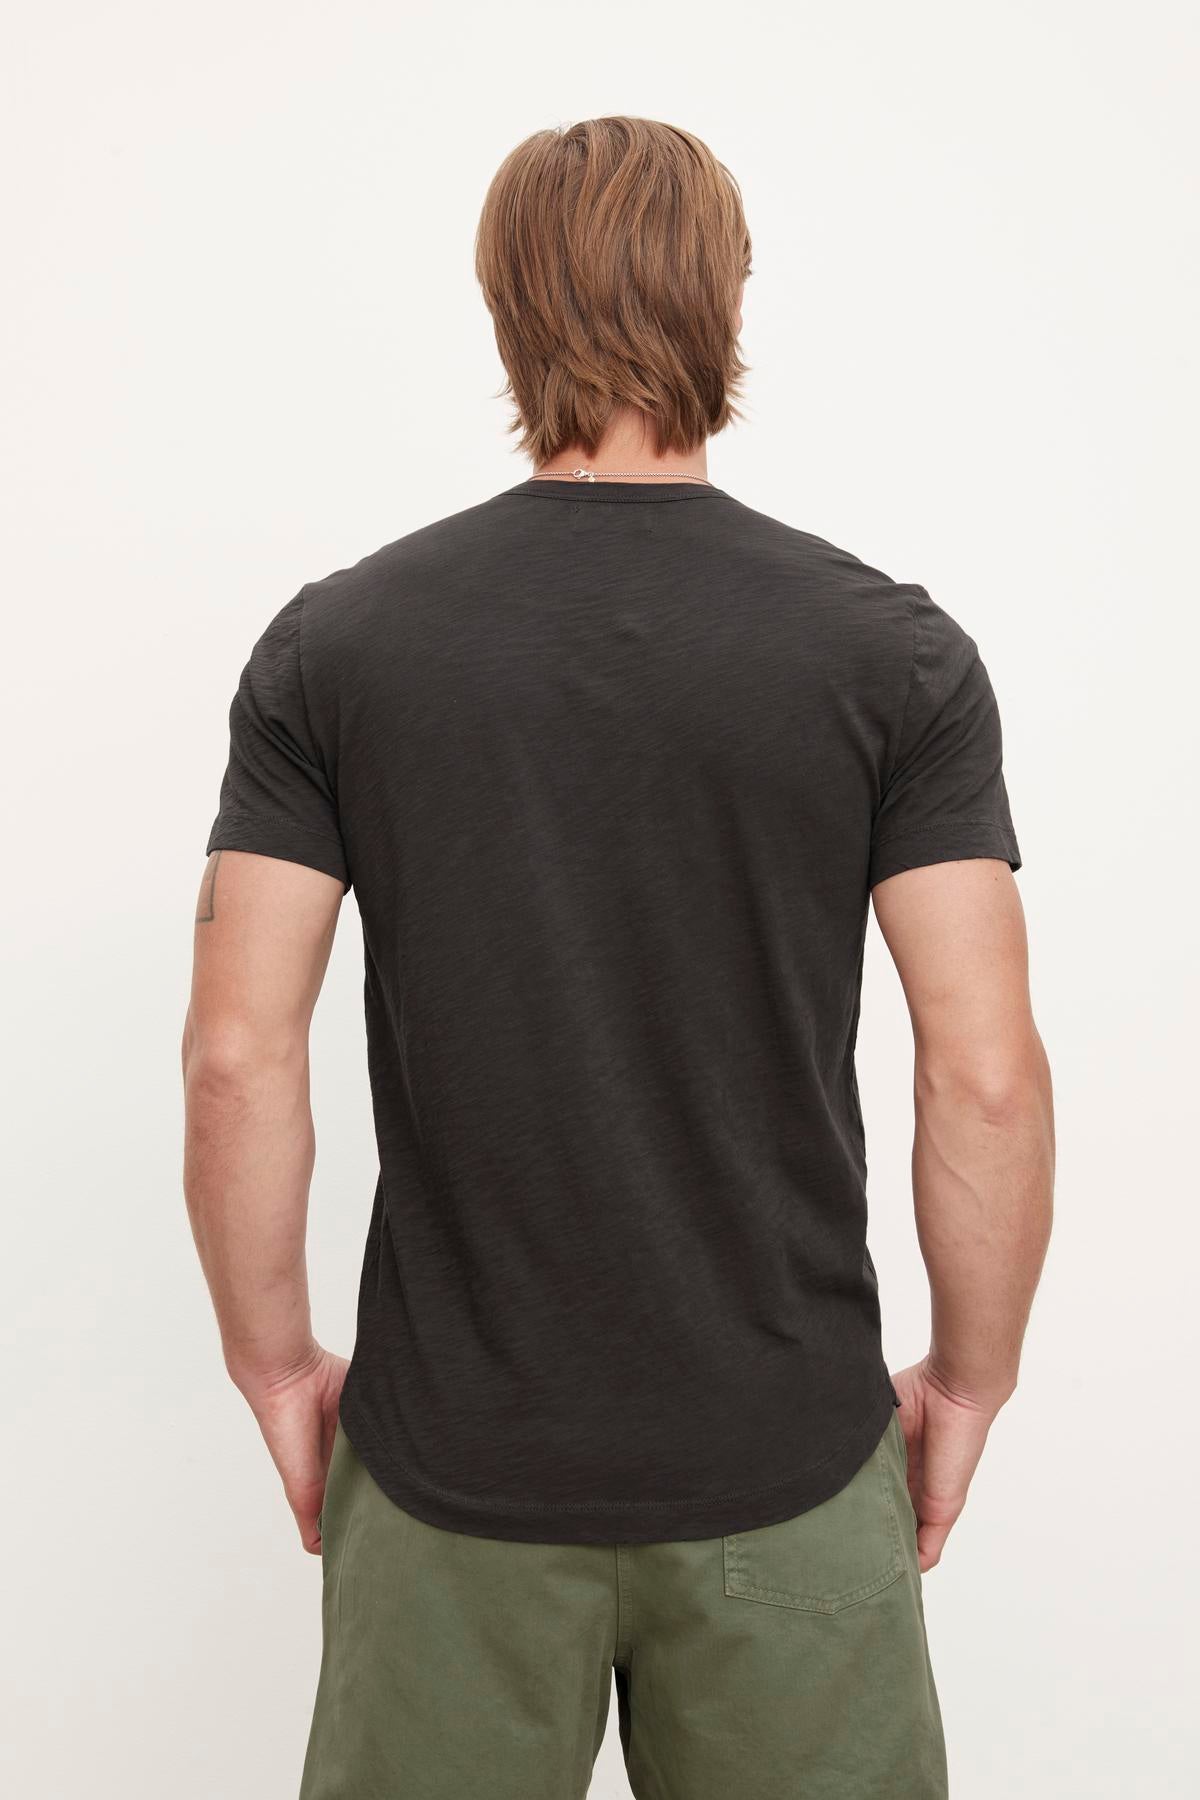 Rear view of a man with brown hair wearing a Velvet by Graham & Spencer AMARO TEE crew neck t-shirt and olive green pants, standing against a plain background.-36805193433281